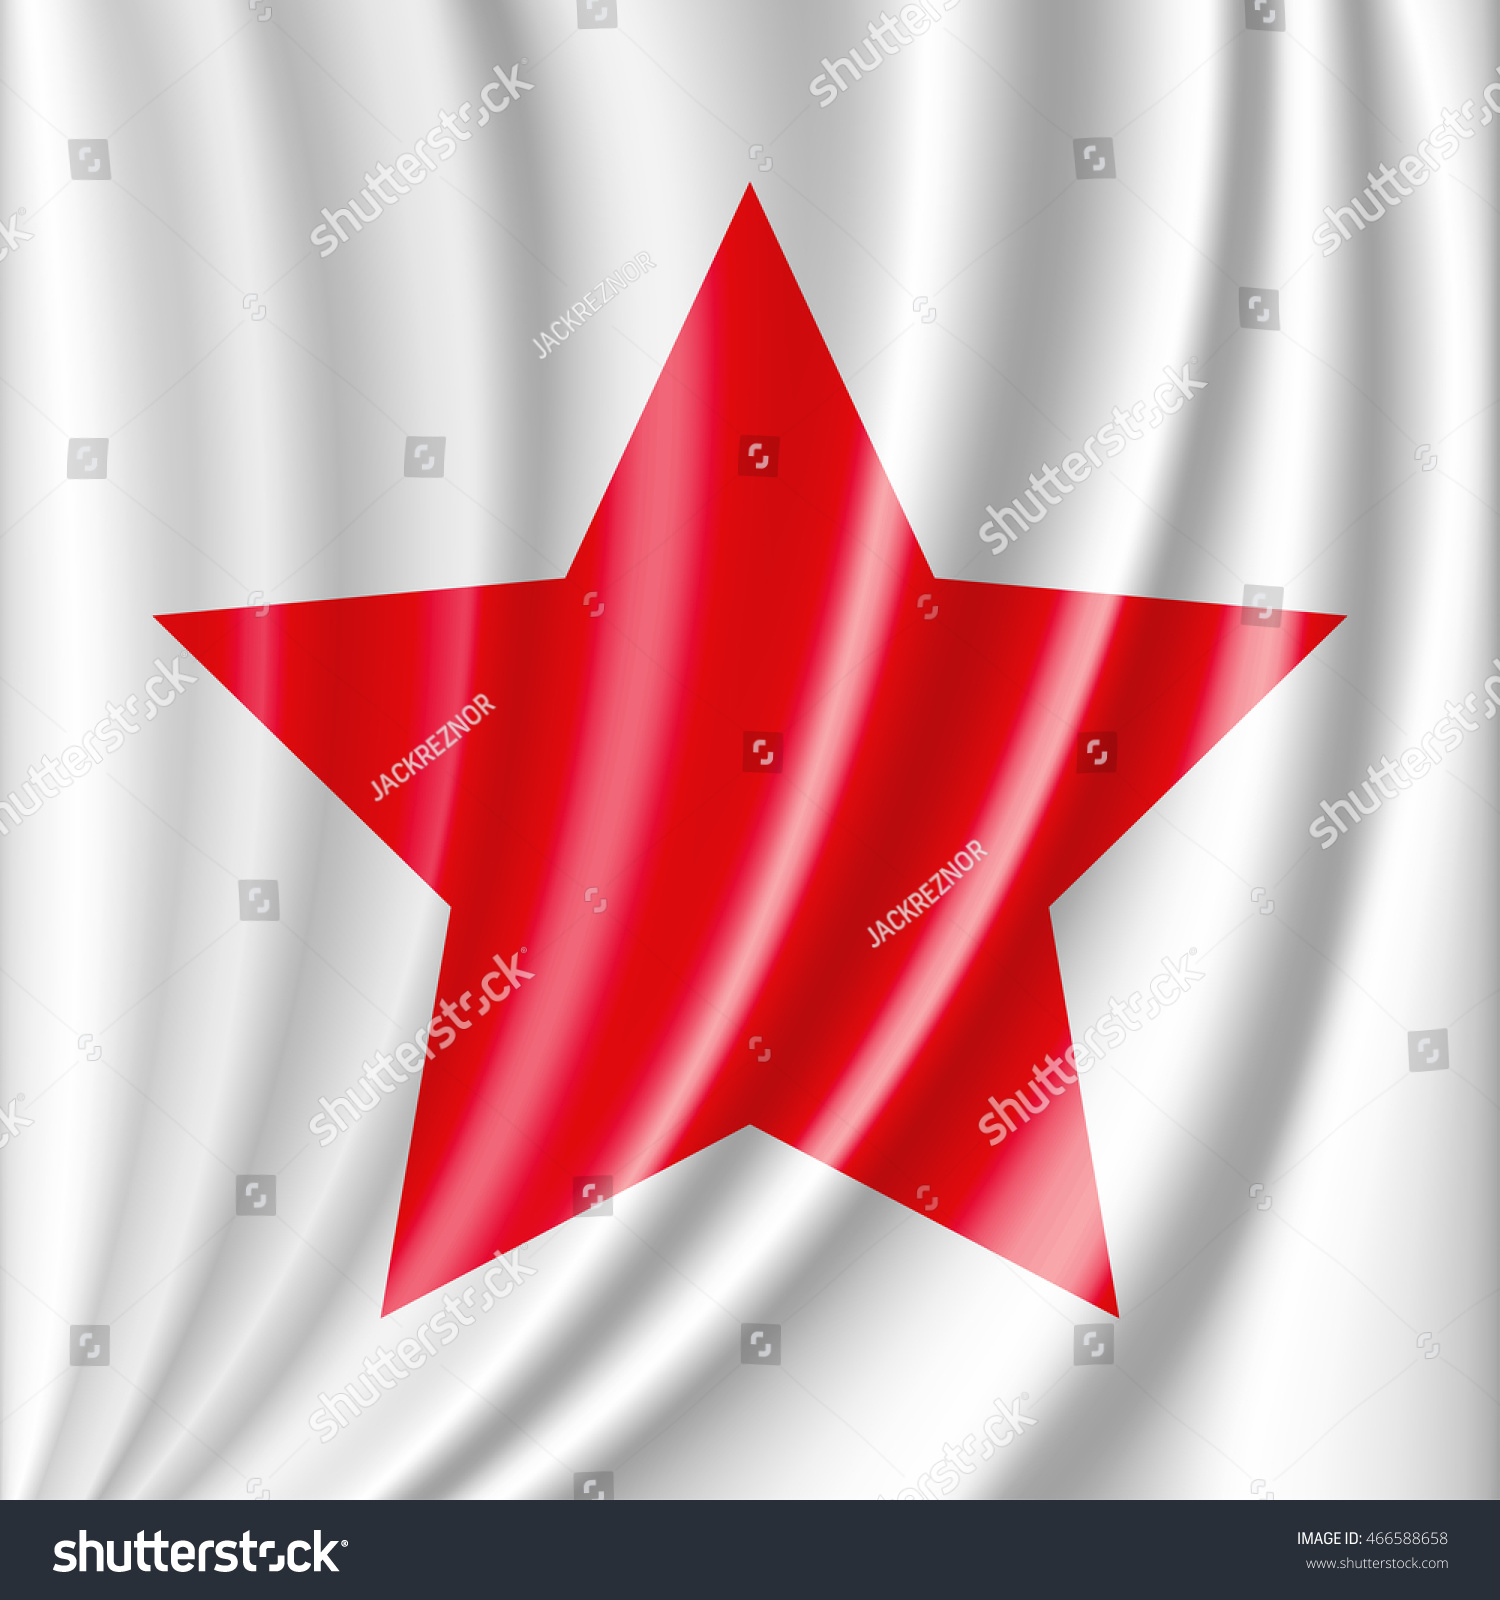 red and white flag with star